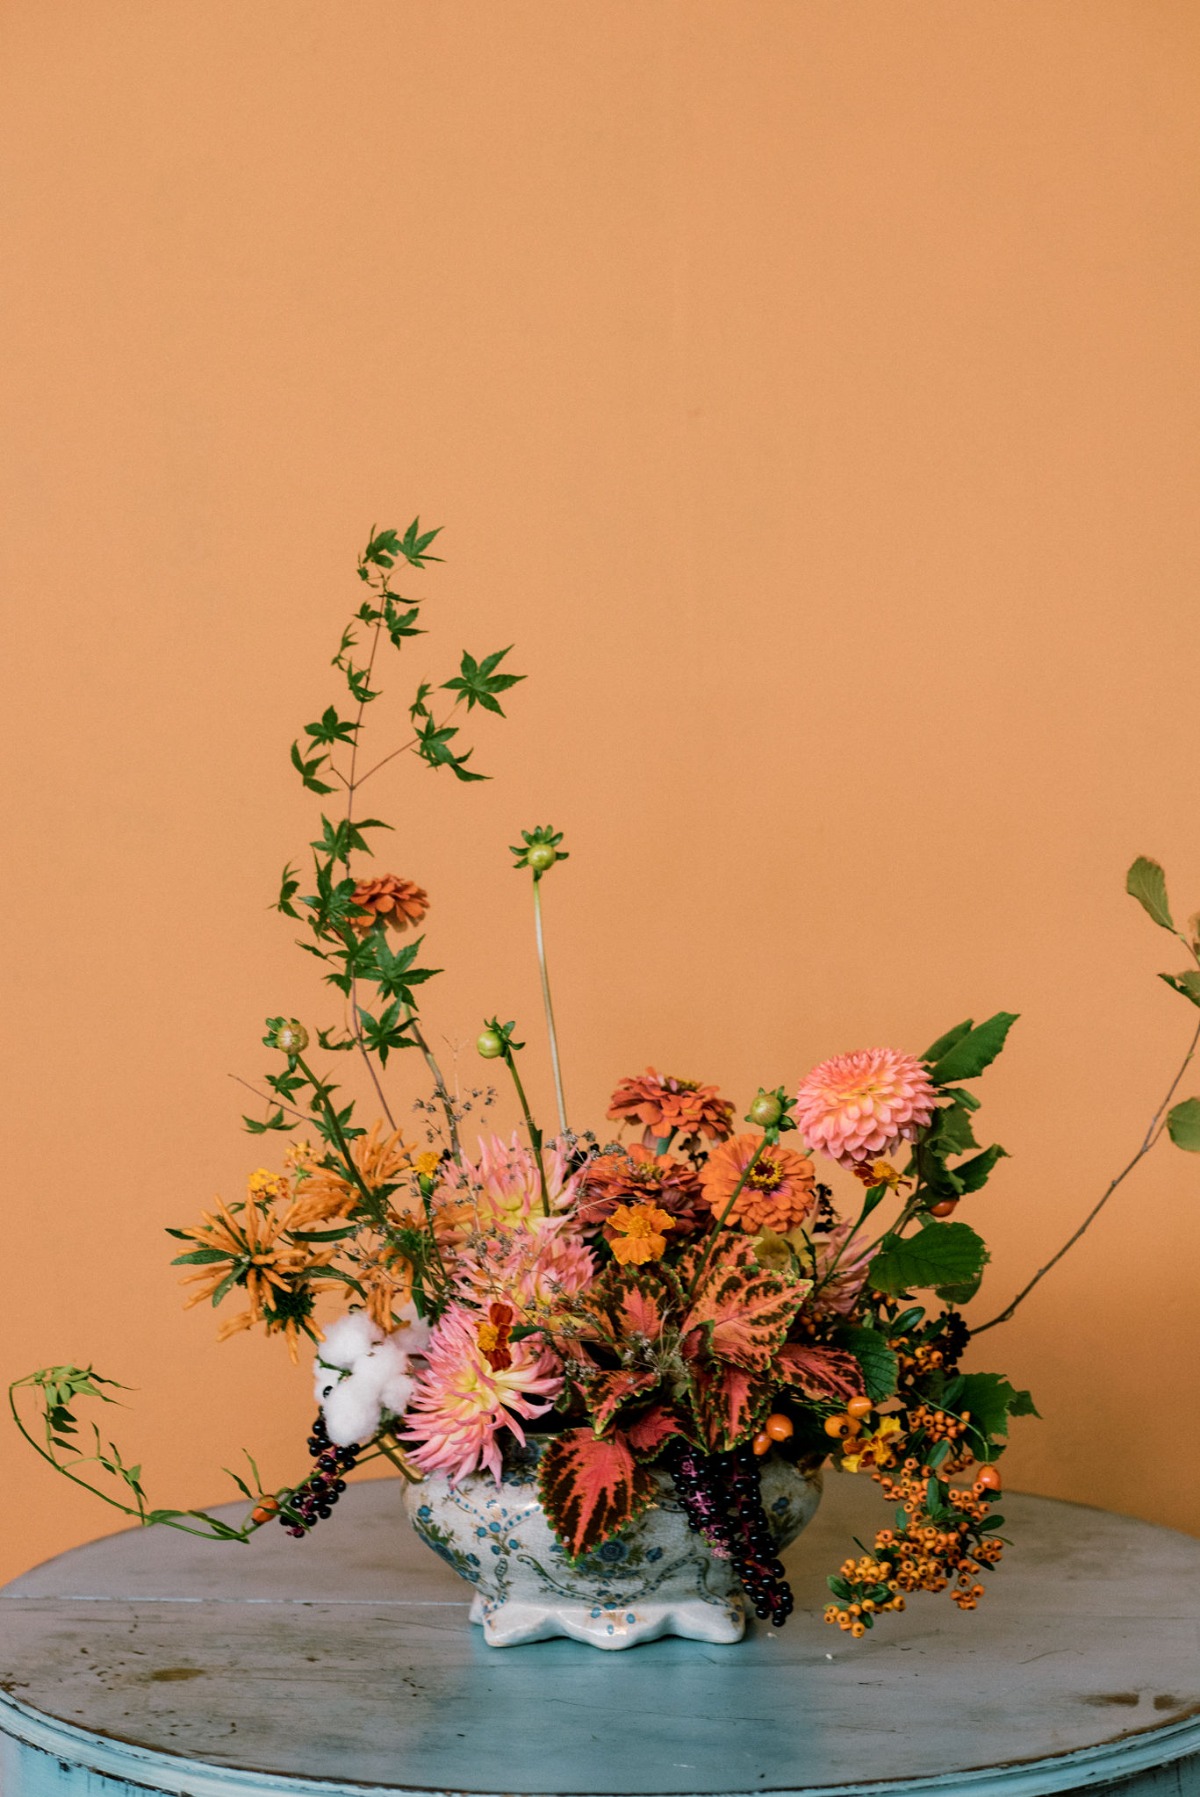 The Bloom Menagerie: Nine Centerpieces that Set the Scene for a Festive Season